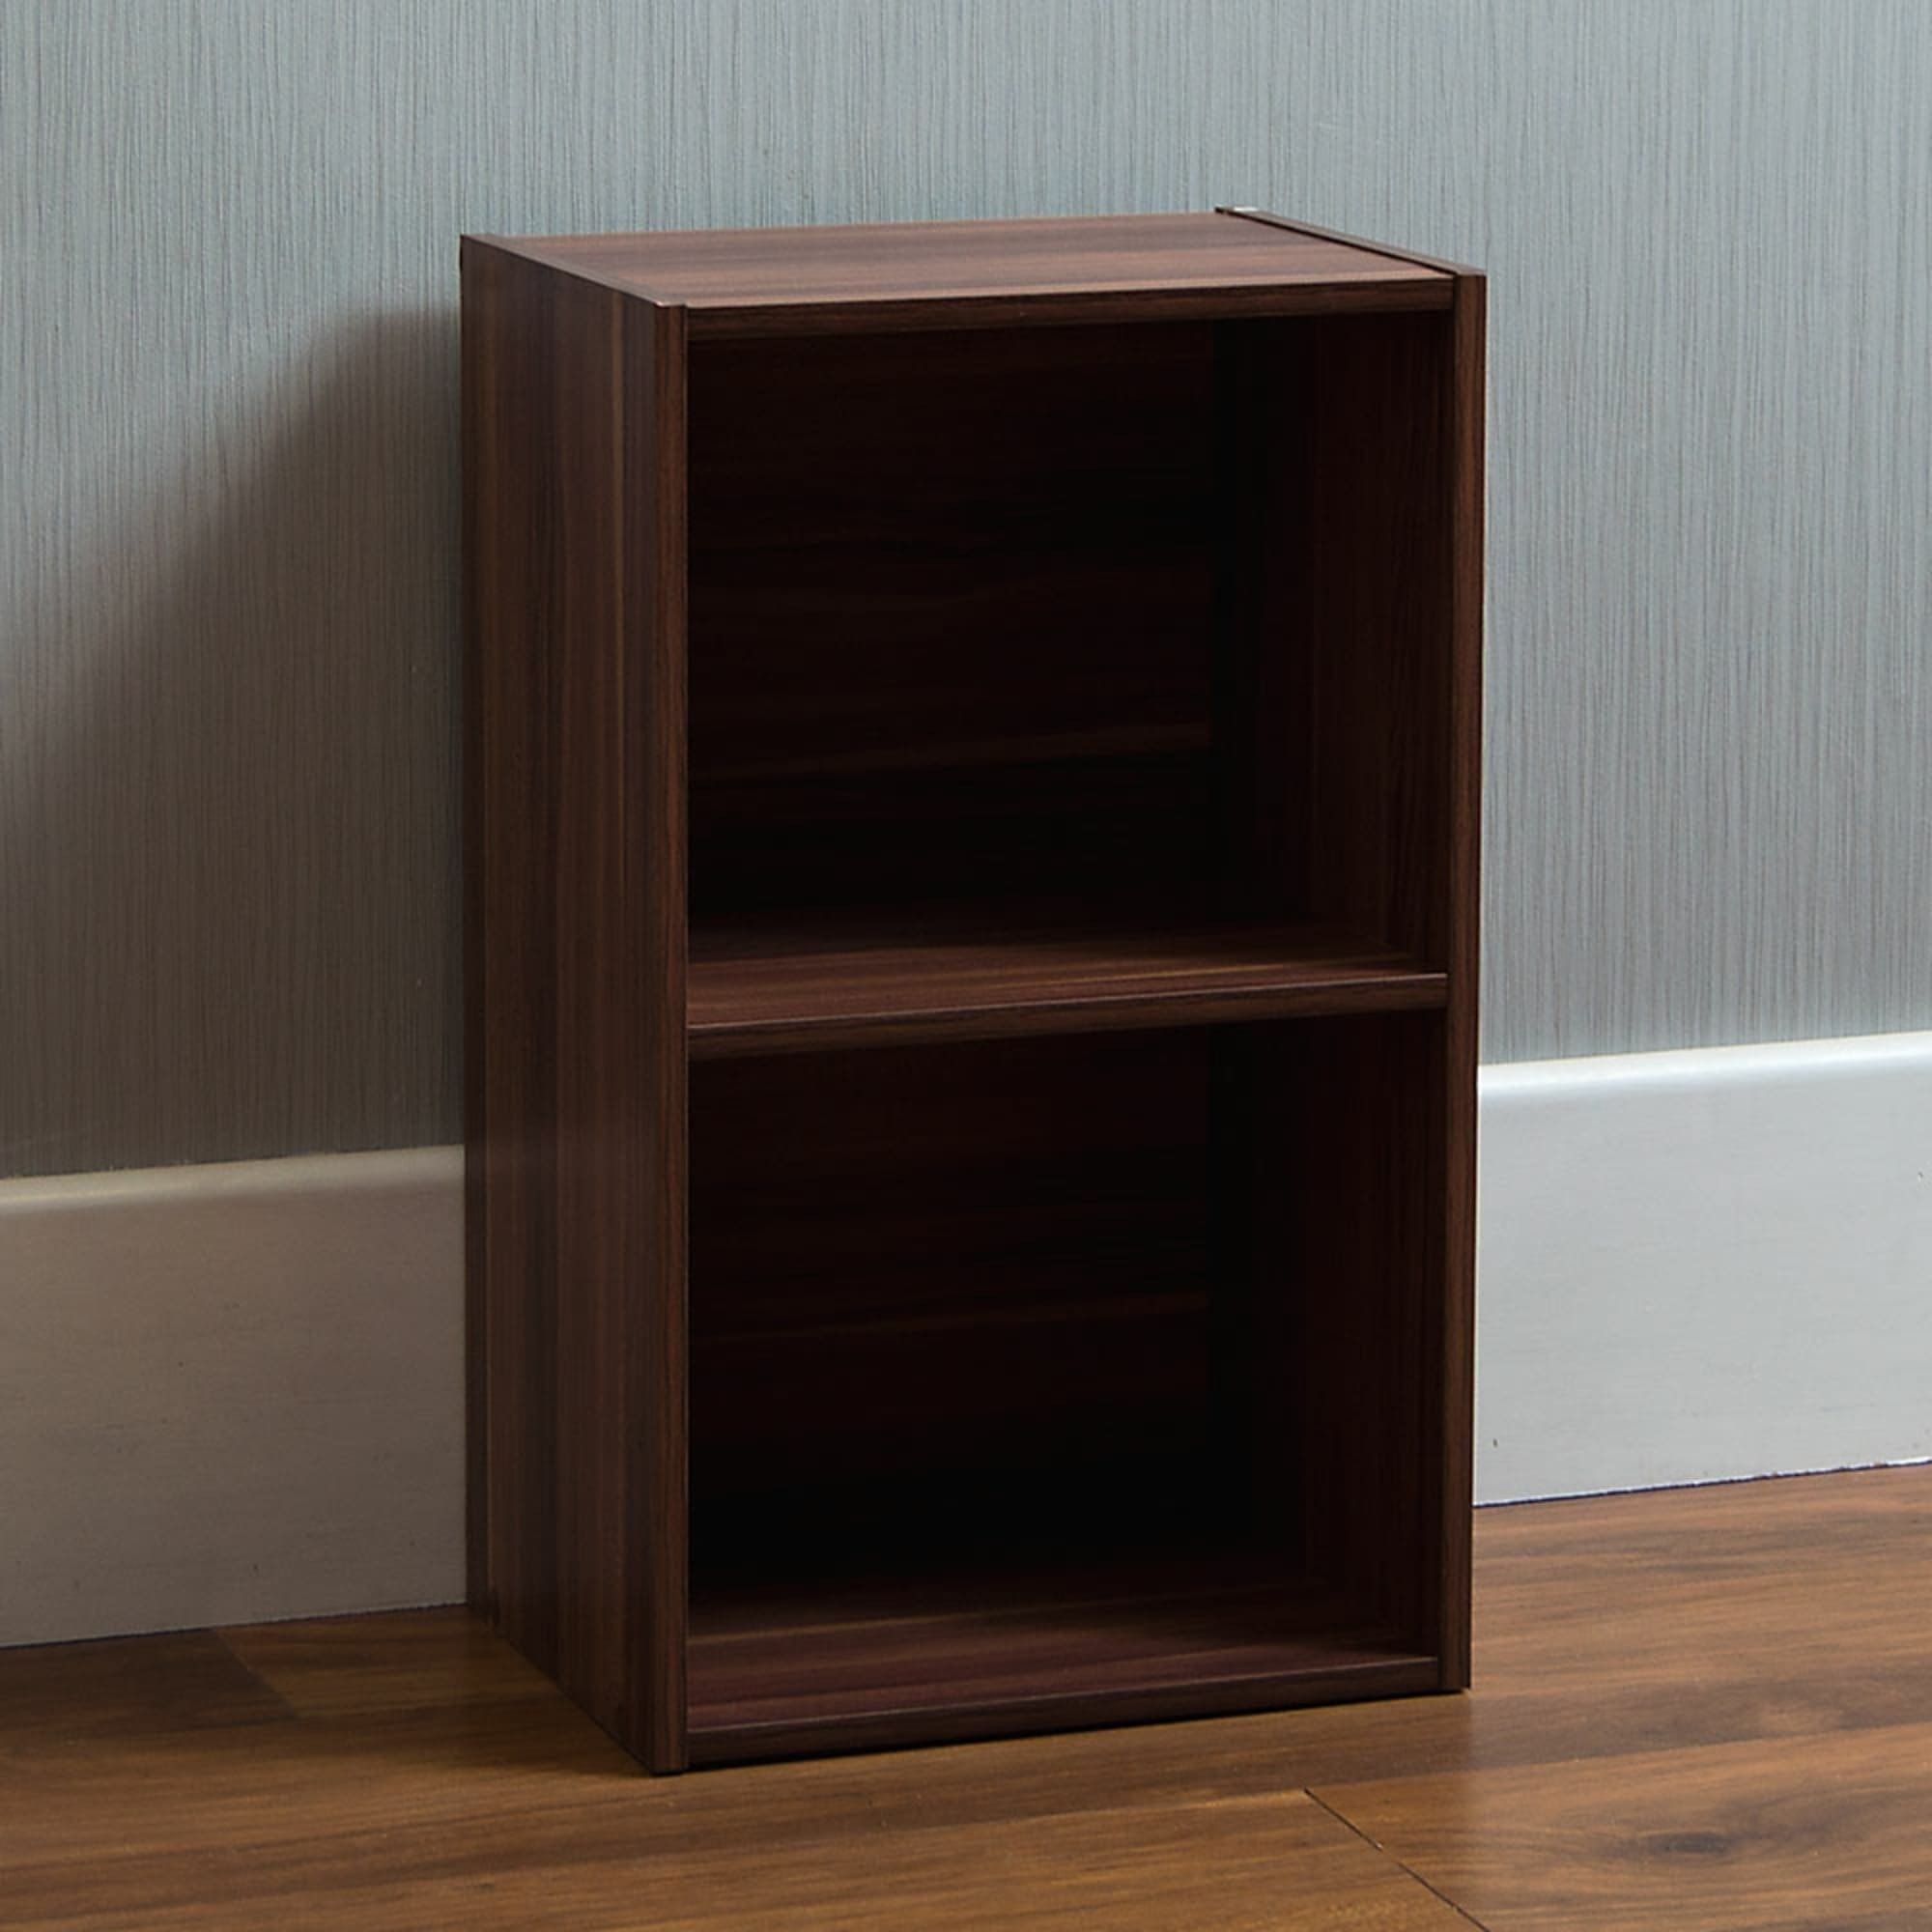 Walnut 2 Tier Small Bookcase | Lounge Furniture | Homesdirect365 For Walnut 2 Tier Bookcases (View 1 of 15)